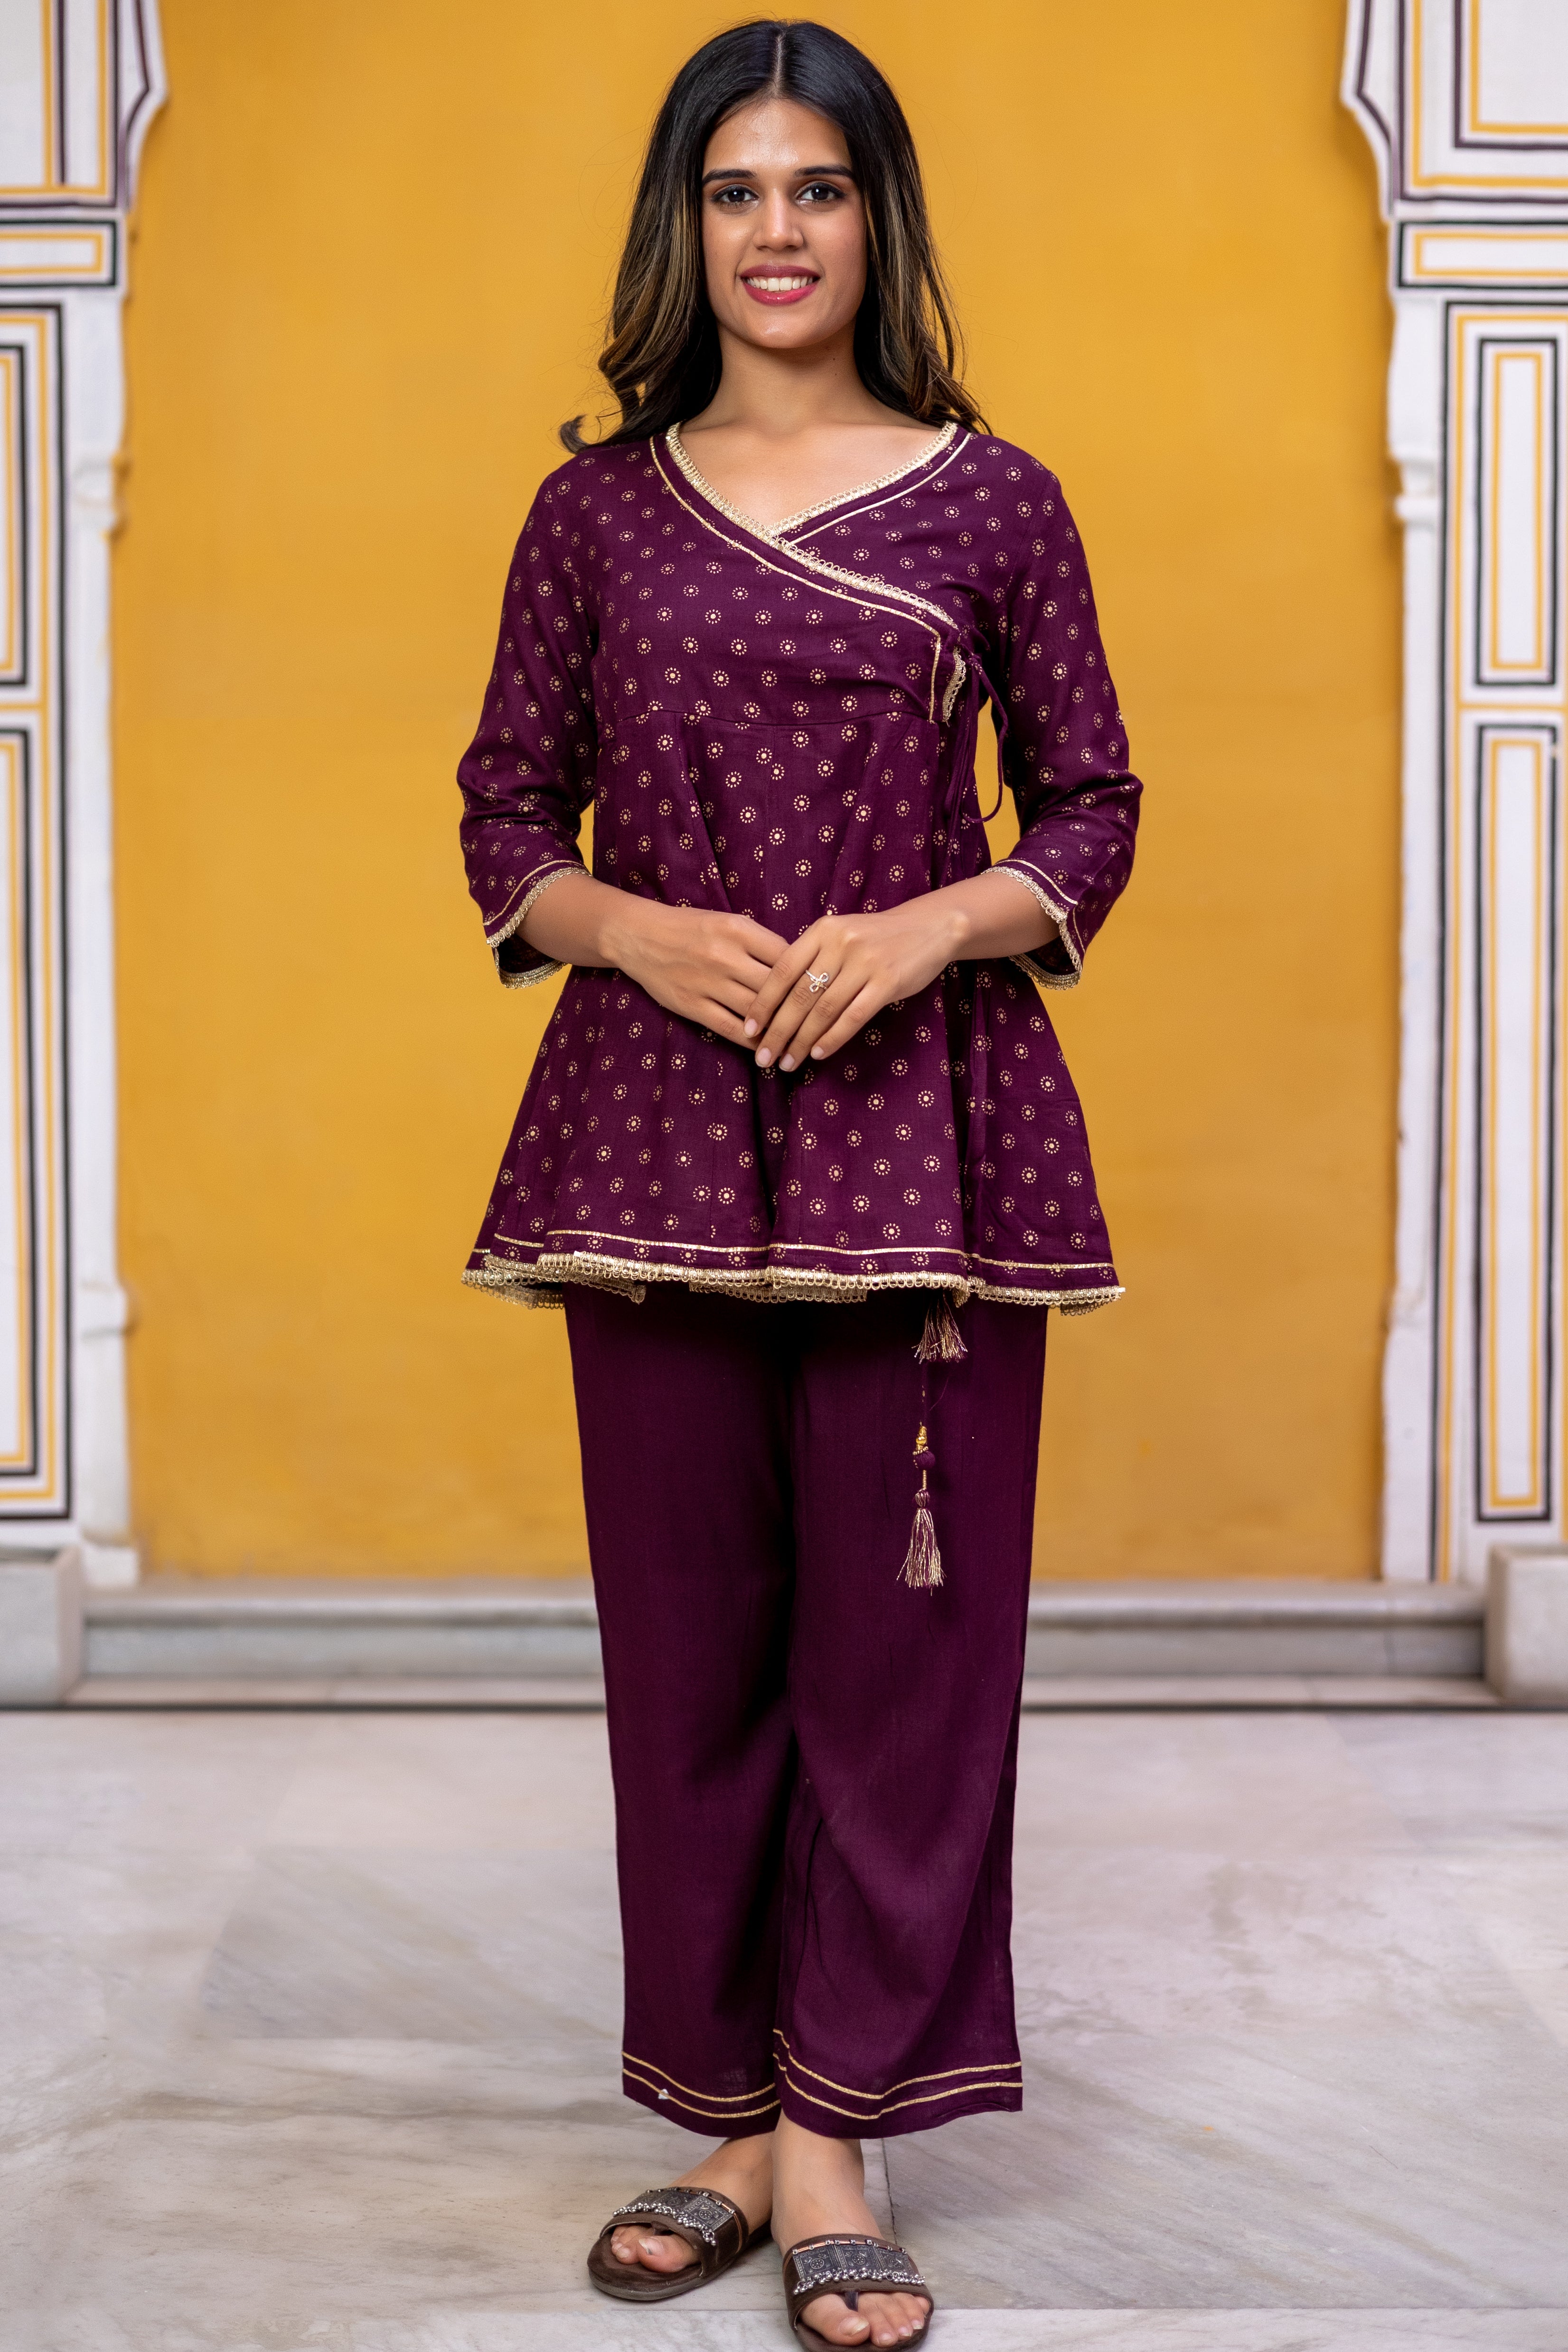 gold-printed-flared-short-kurti-set-in-angarkha-style-in-rayon-slub-with-v-neck-and-quater-sleeves-paired-with-straight-pant